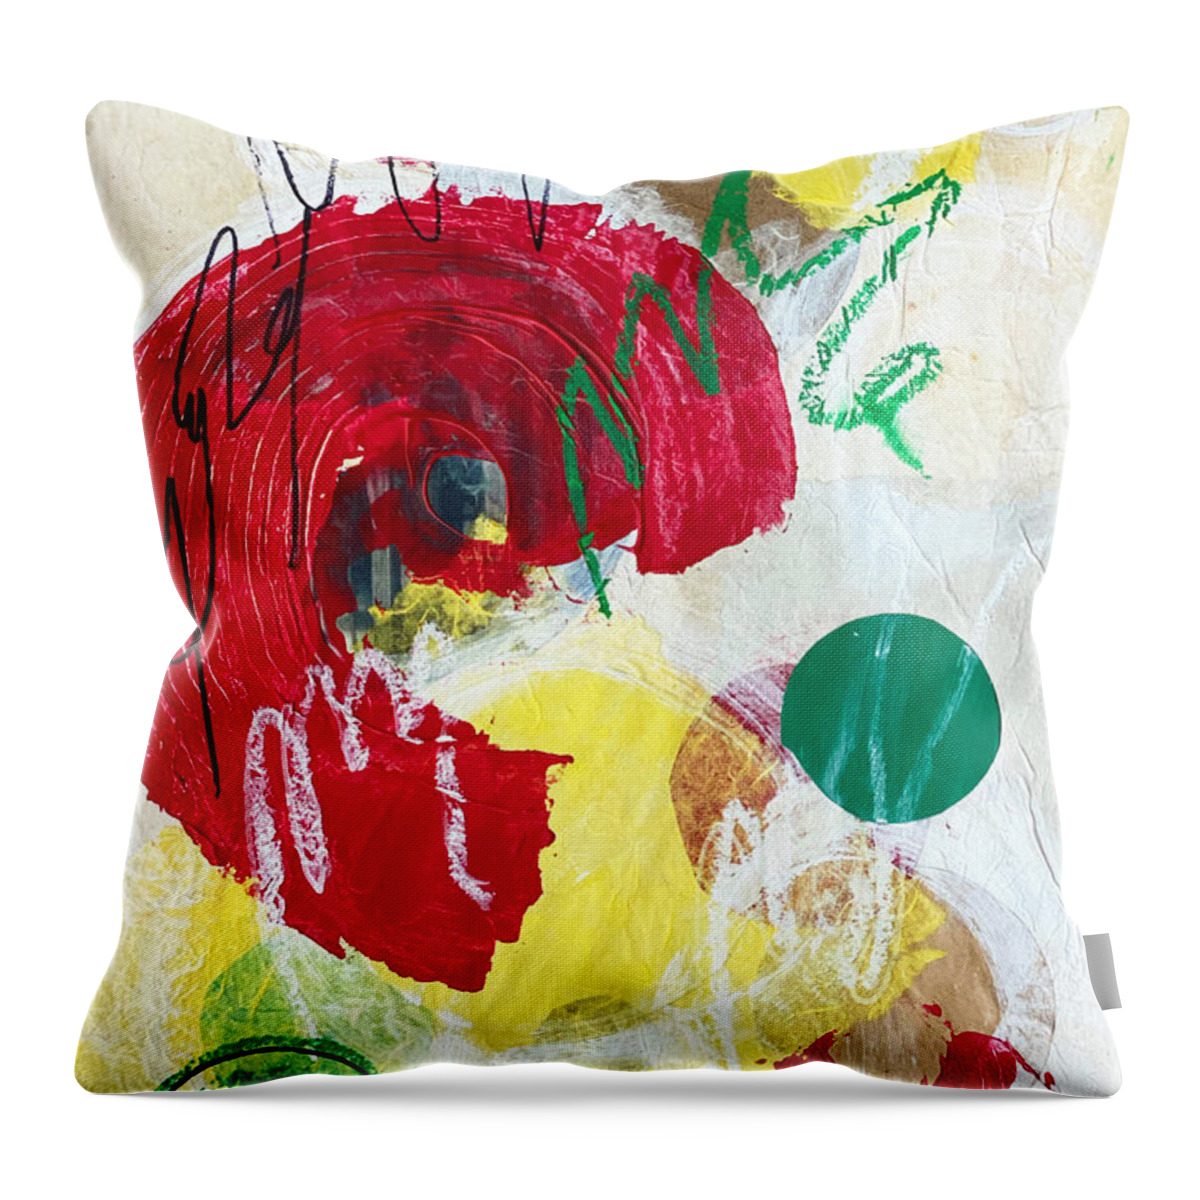 Mixed Media Collage Throw Pillow featuring the mixed media Circus in my Mind by Jessica Levant